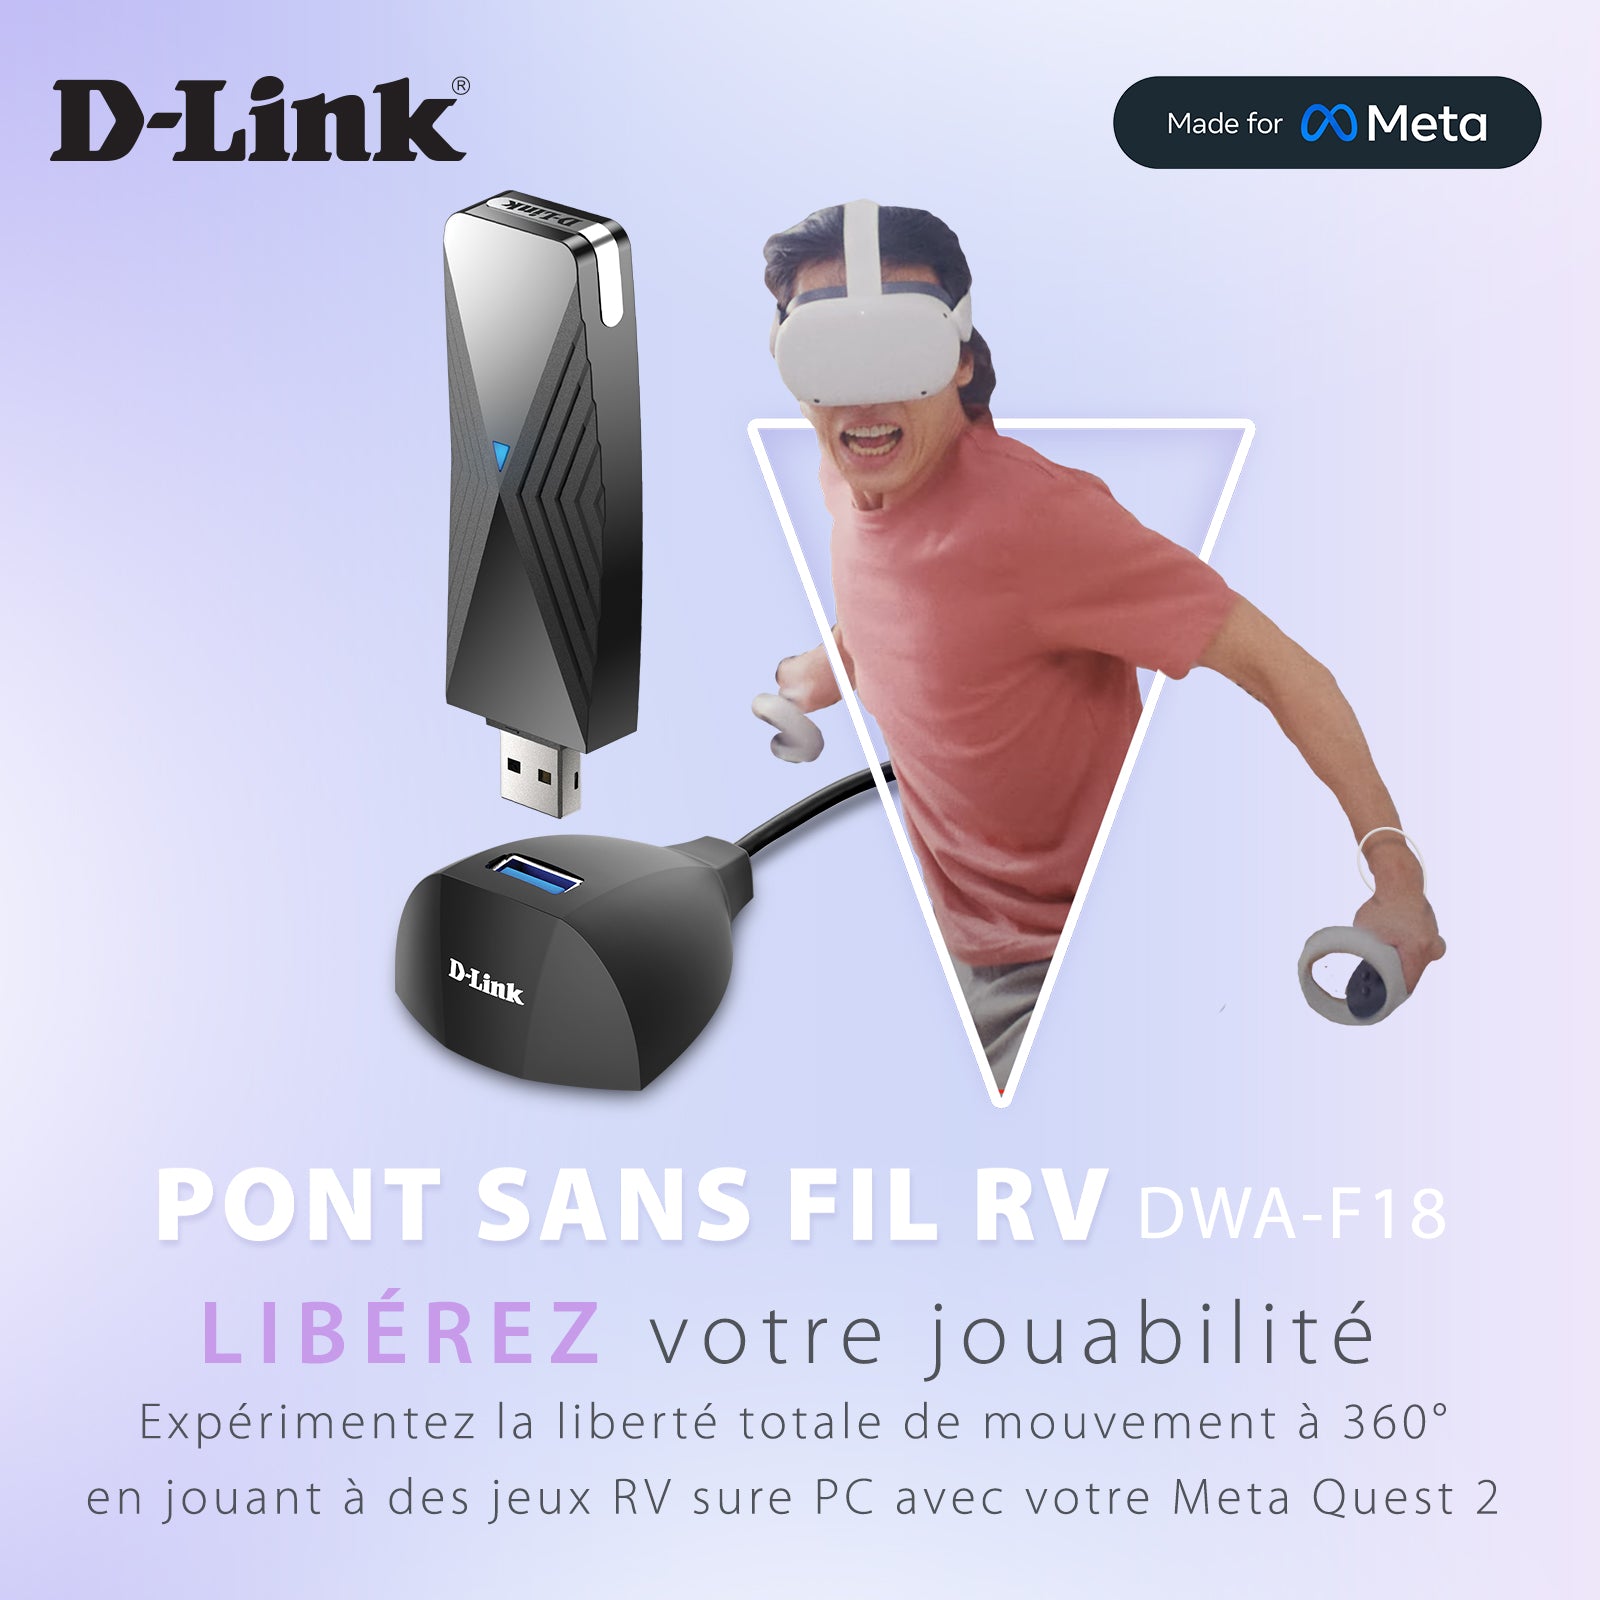 D-Link VR Air Bridge - DWA-F18 - Connect your PC to your Meta Quest 2 headset